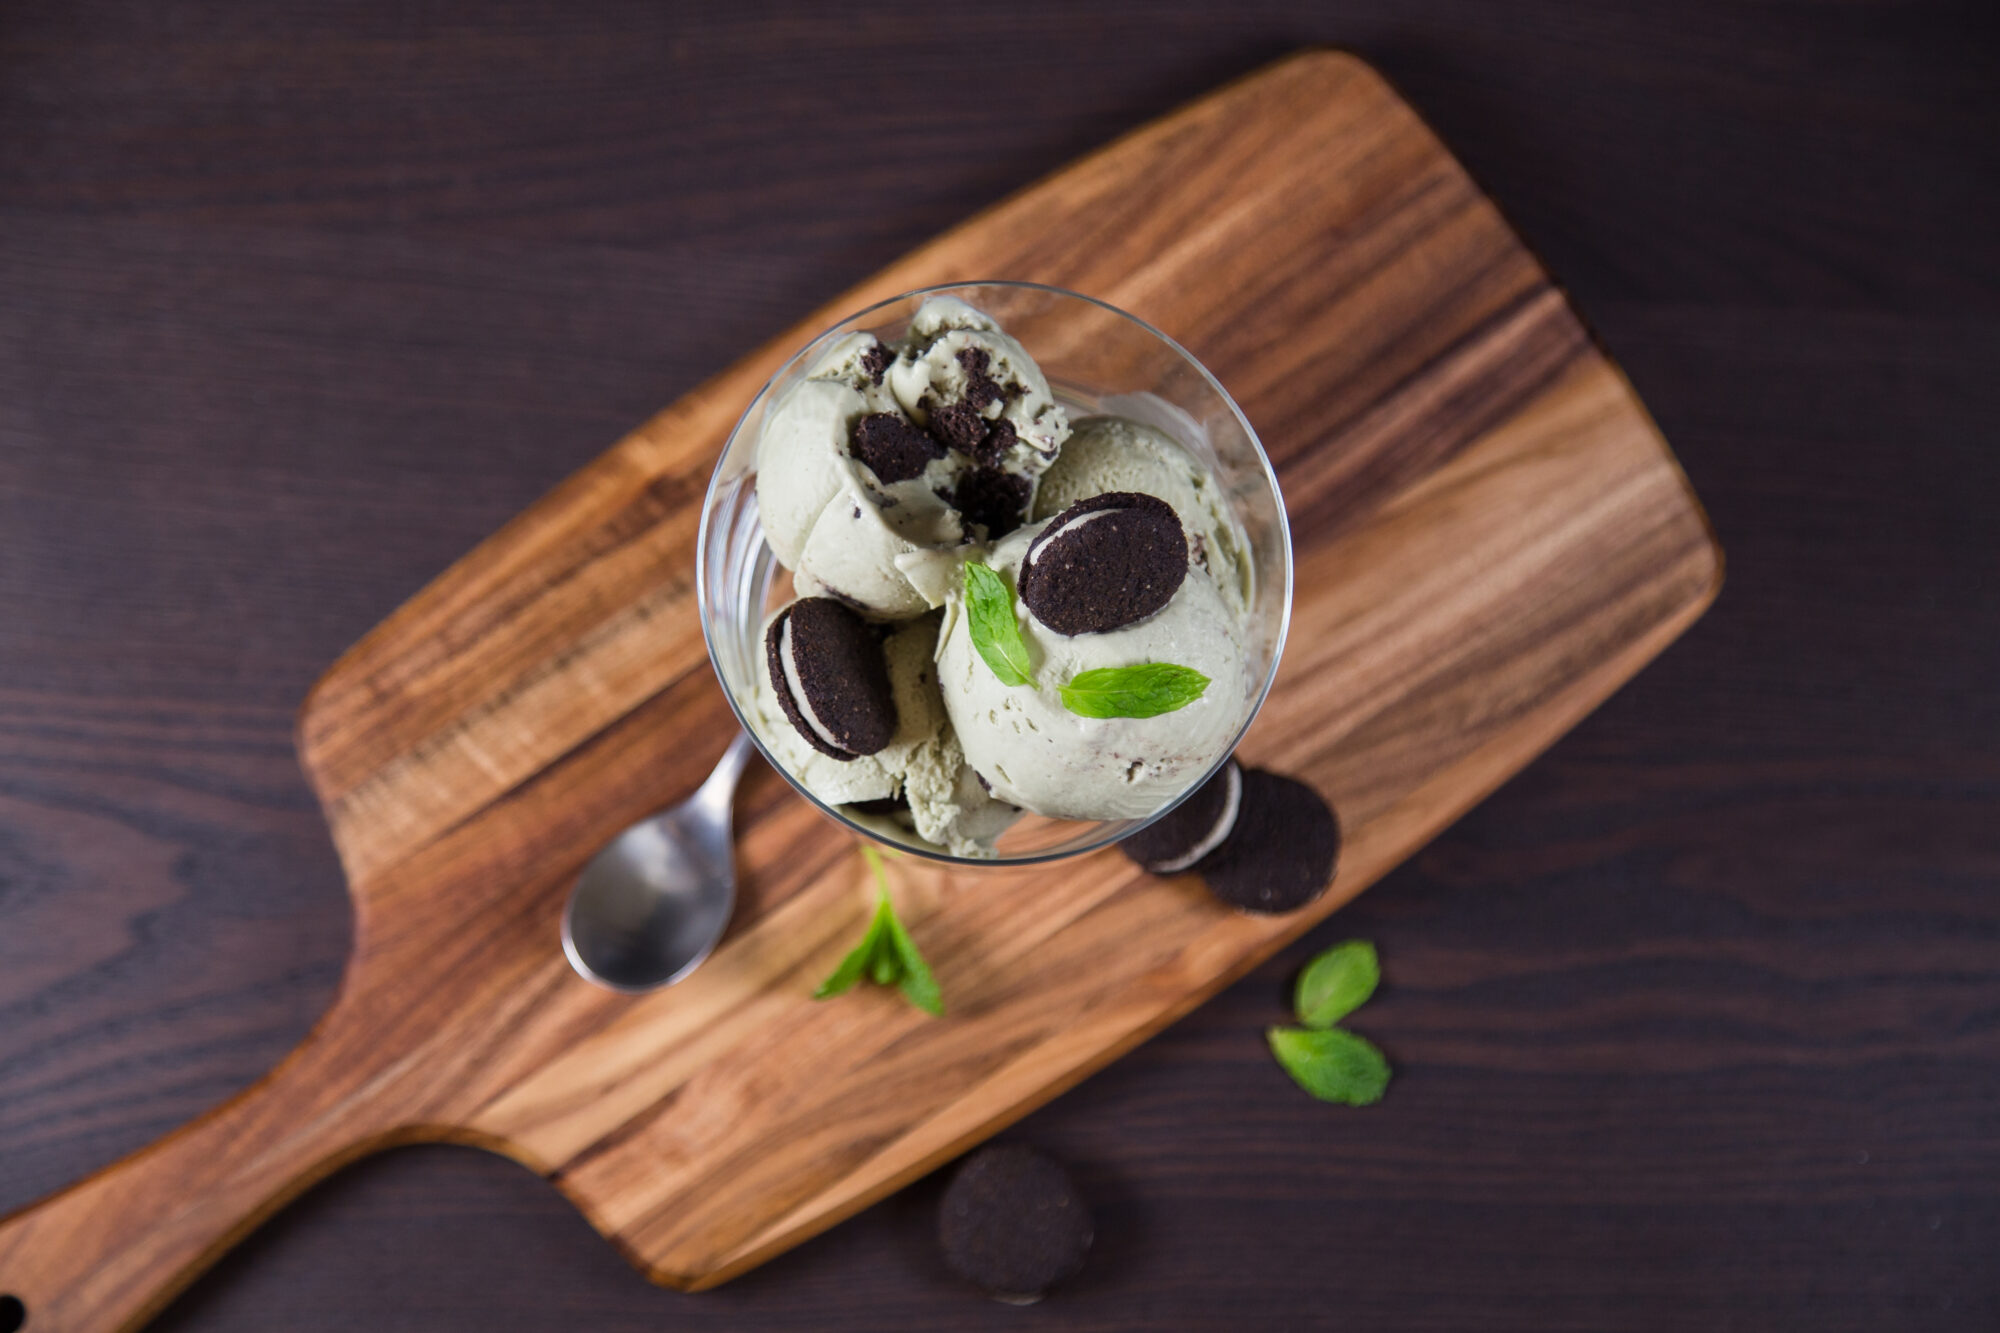 Wooden cutting board with a glass dish filled with Mint Chocolate Cookie Ice Cream, topped with cookies.